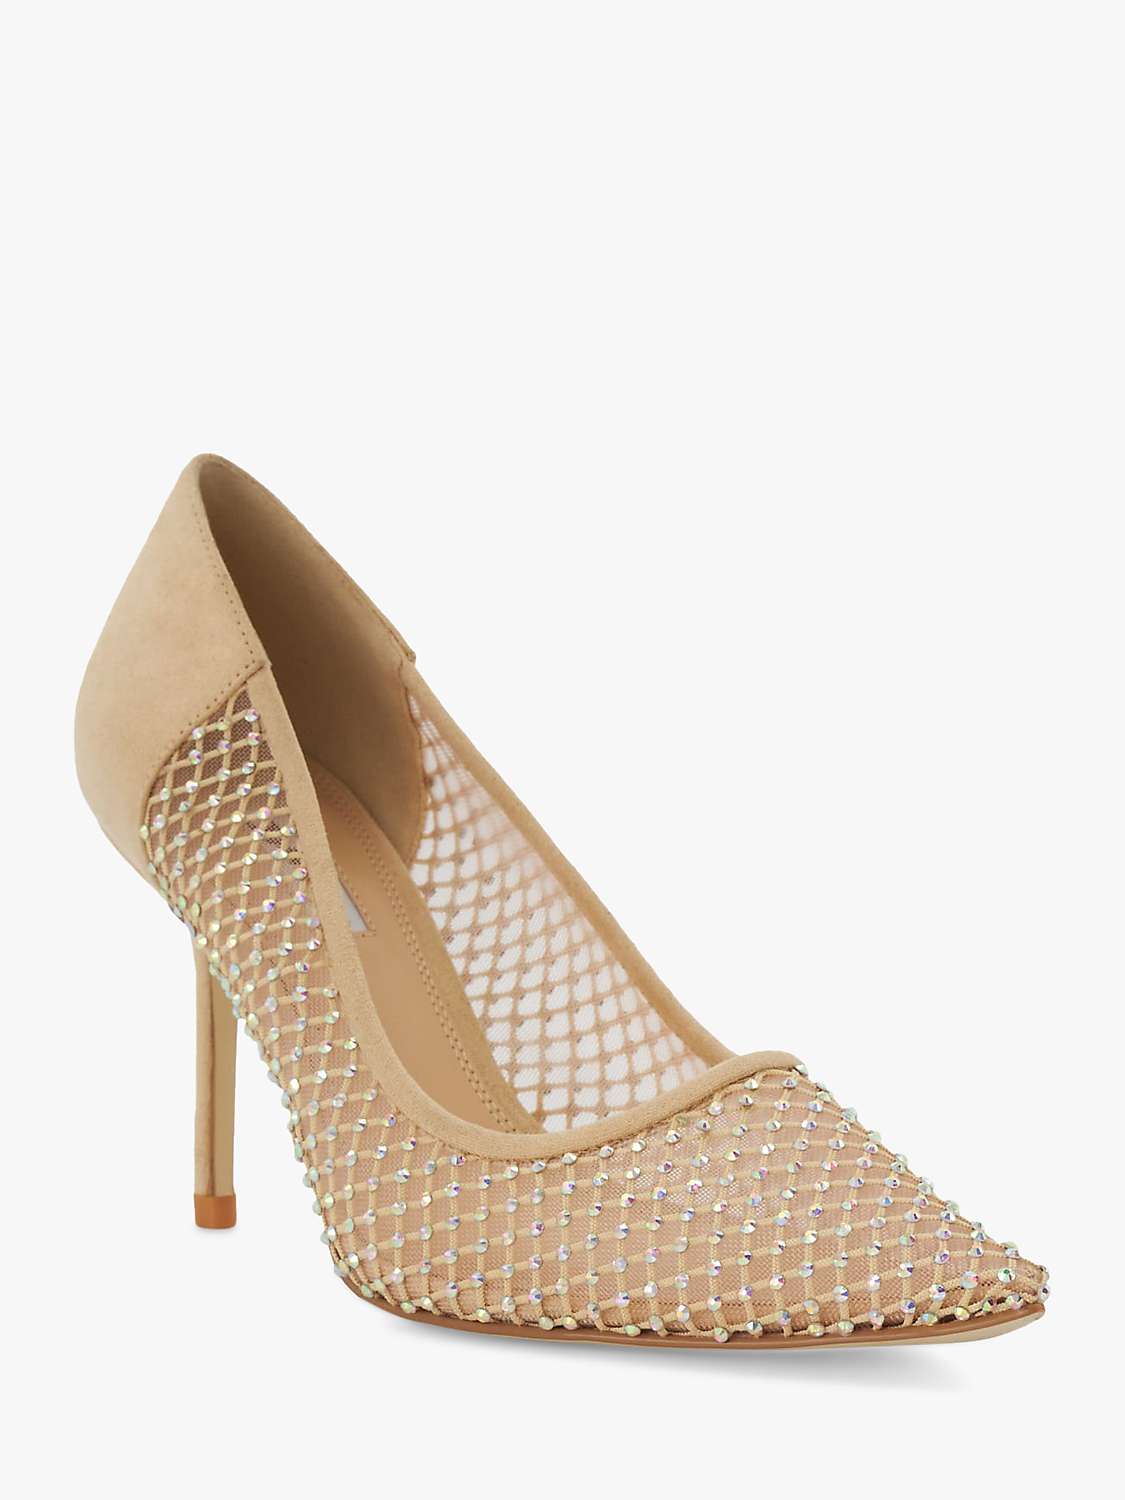 Buy Dune Affect Mesh Pointed Toe Diamante Court Shoes, Ecru Online at johnlewis.com